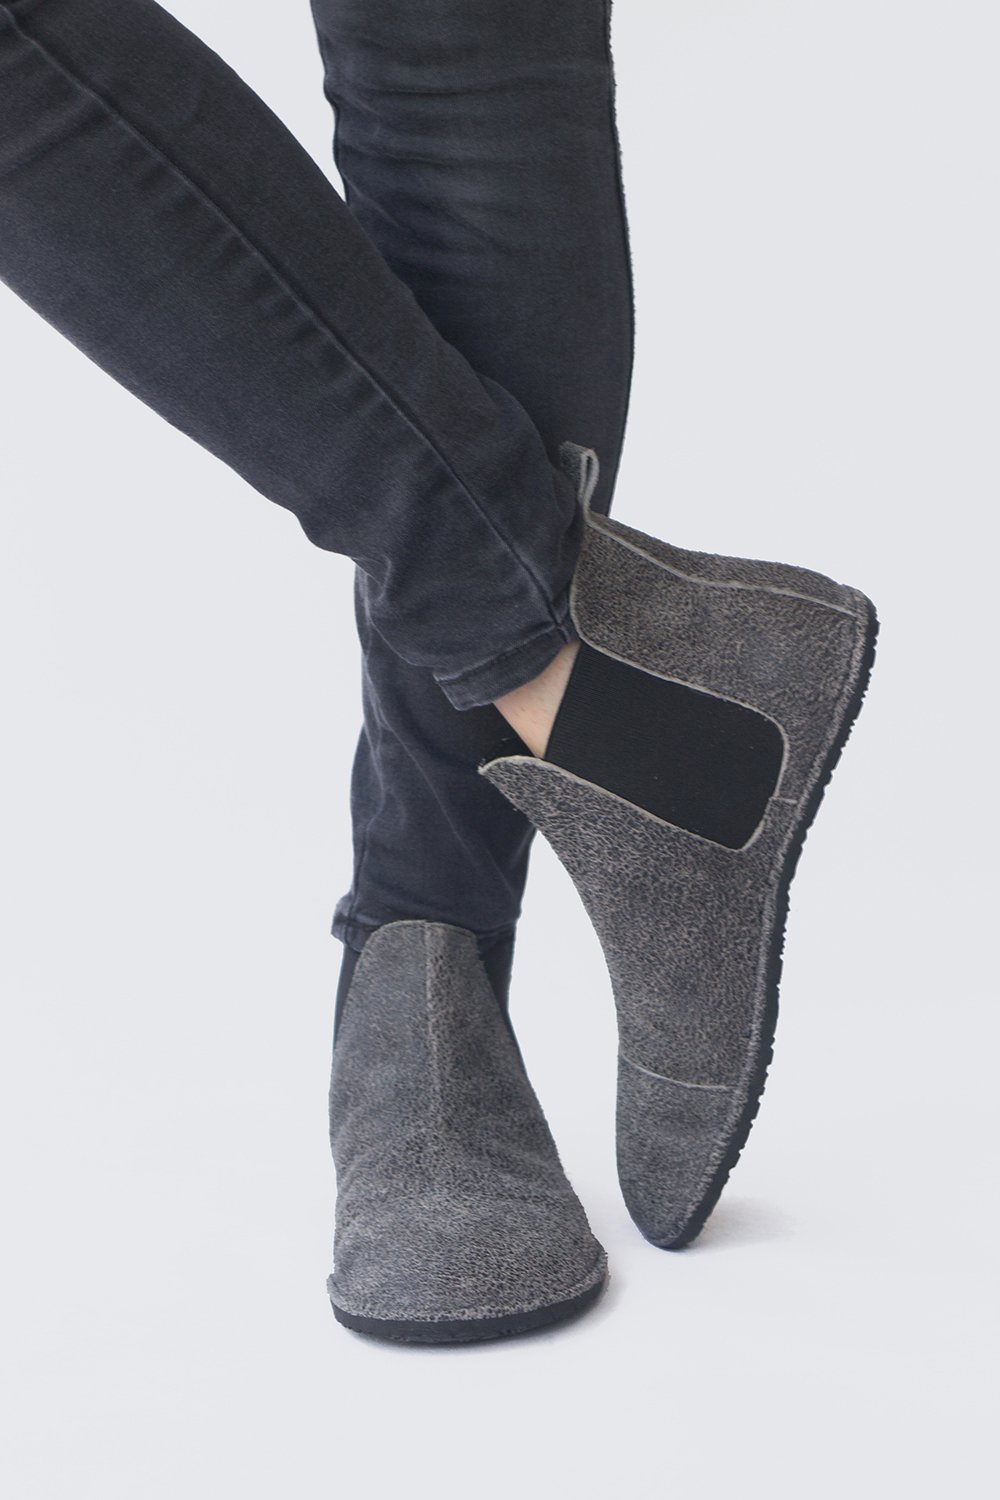 Image of Chelsea boots in Cracked Coal suede